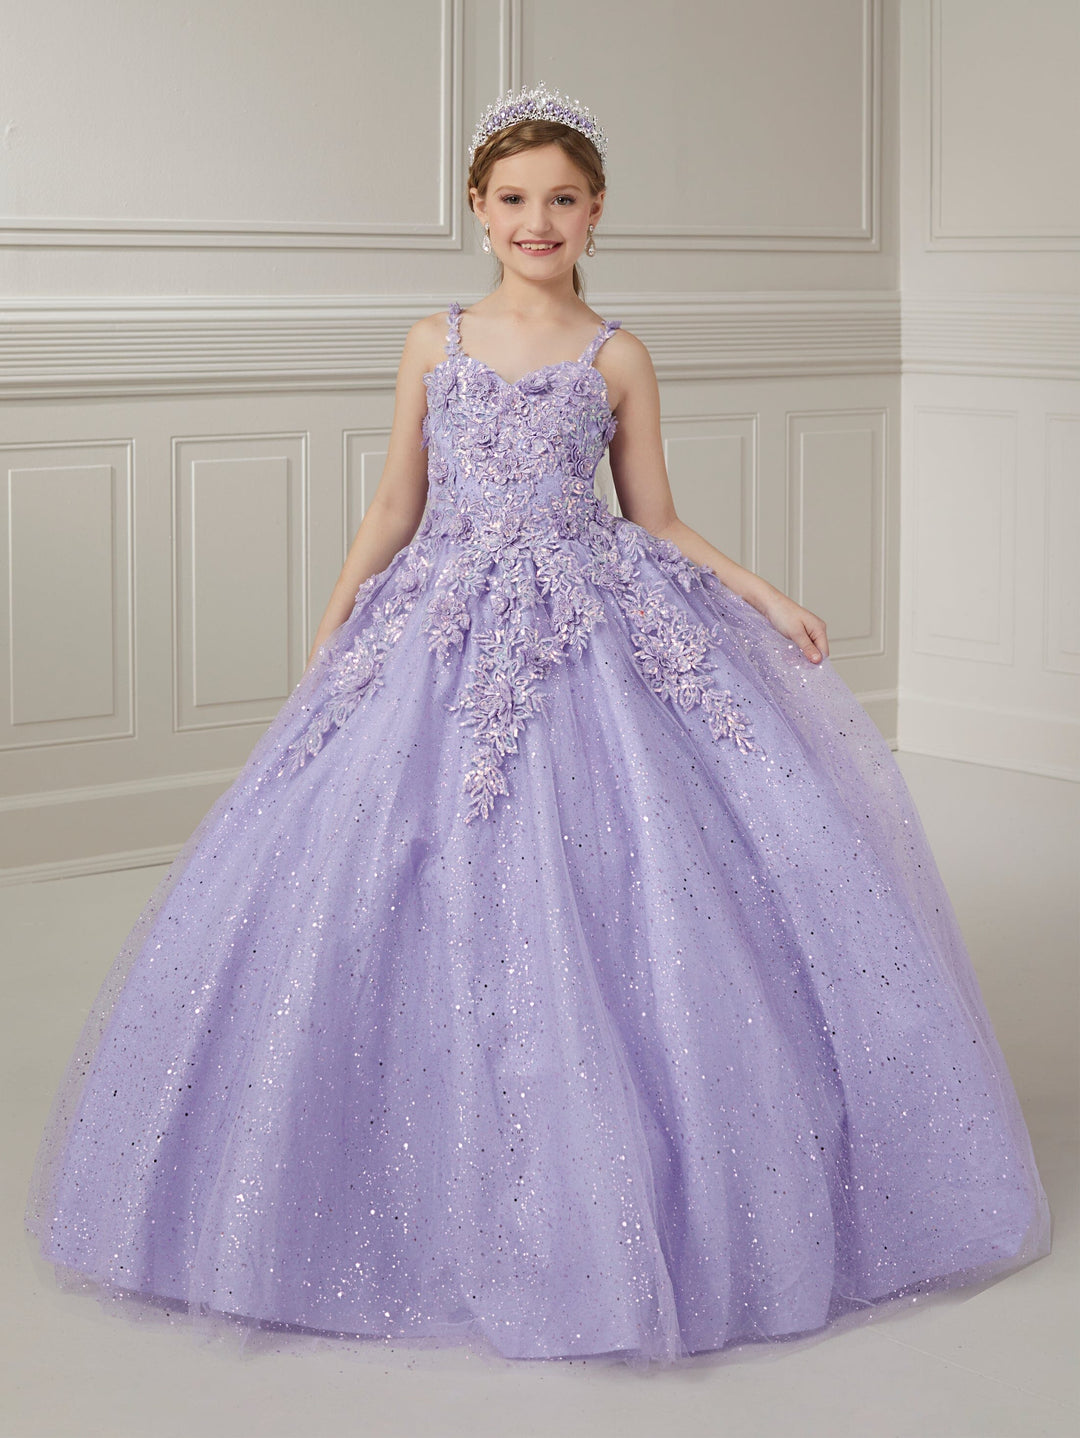 Girls Sleeveless Feather Gown by Tiffany Princess 13727